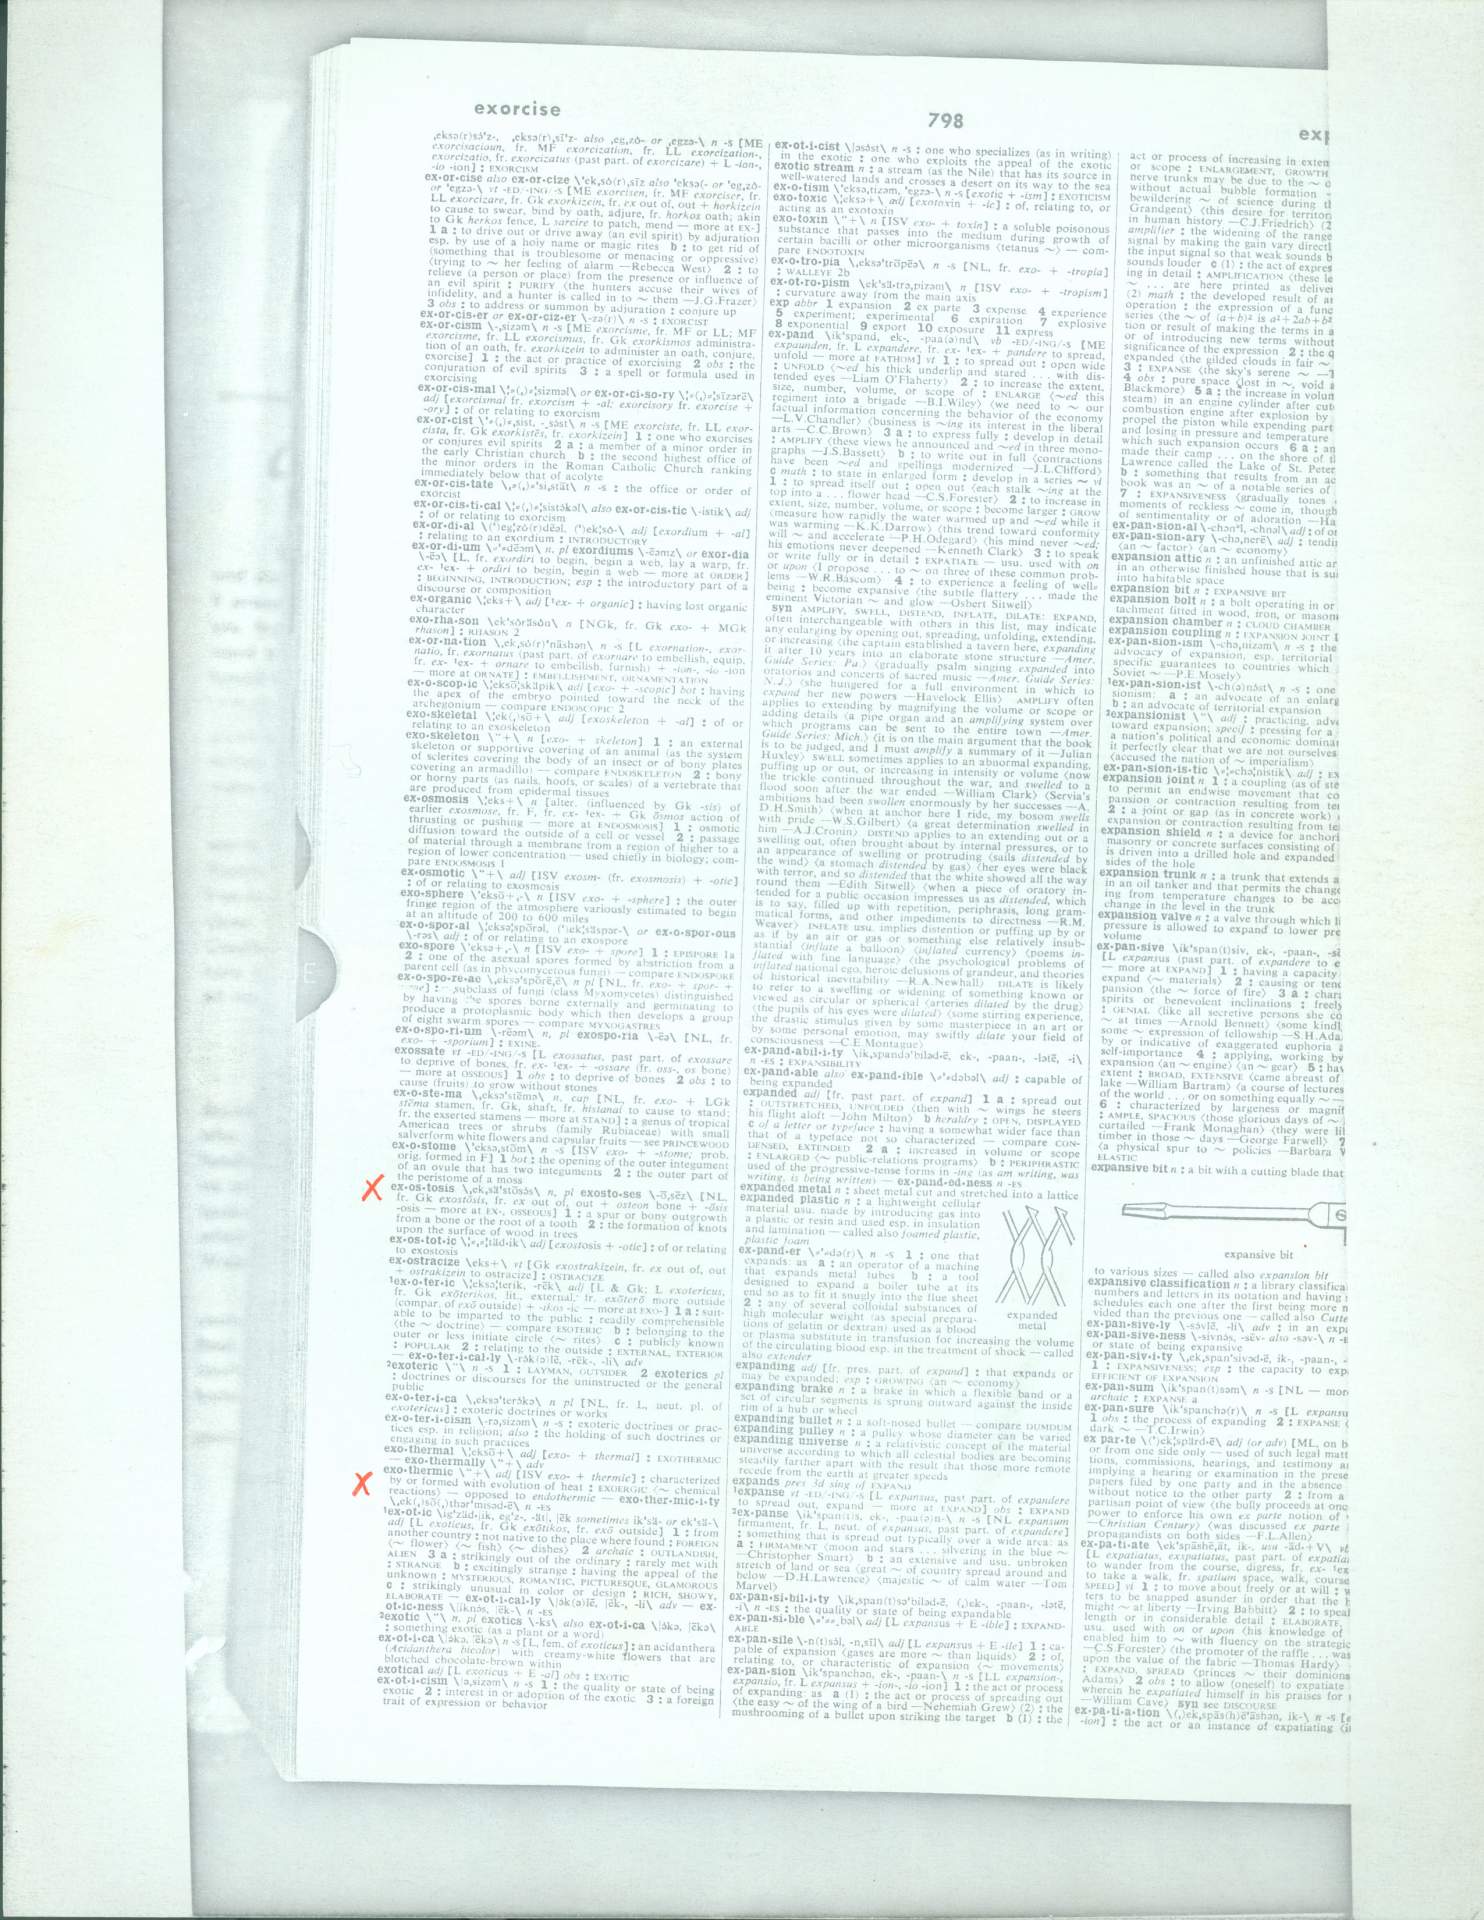 Untitled (photocopy from Webster's Dictionary)